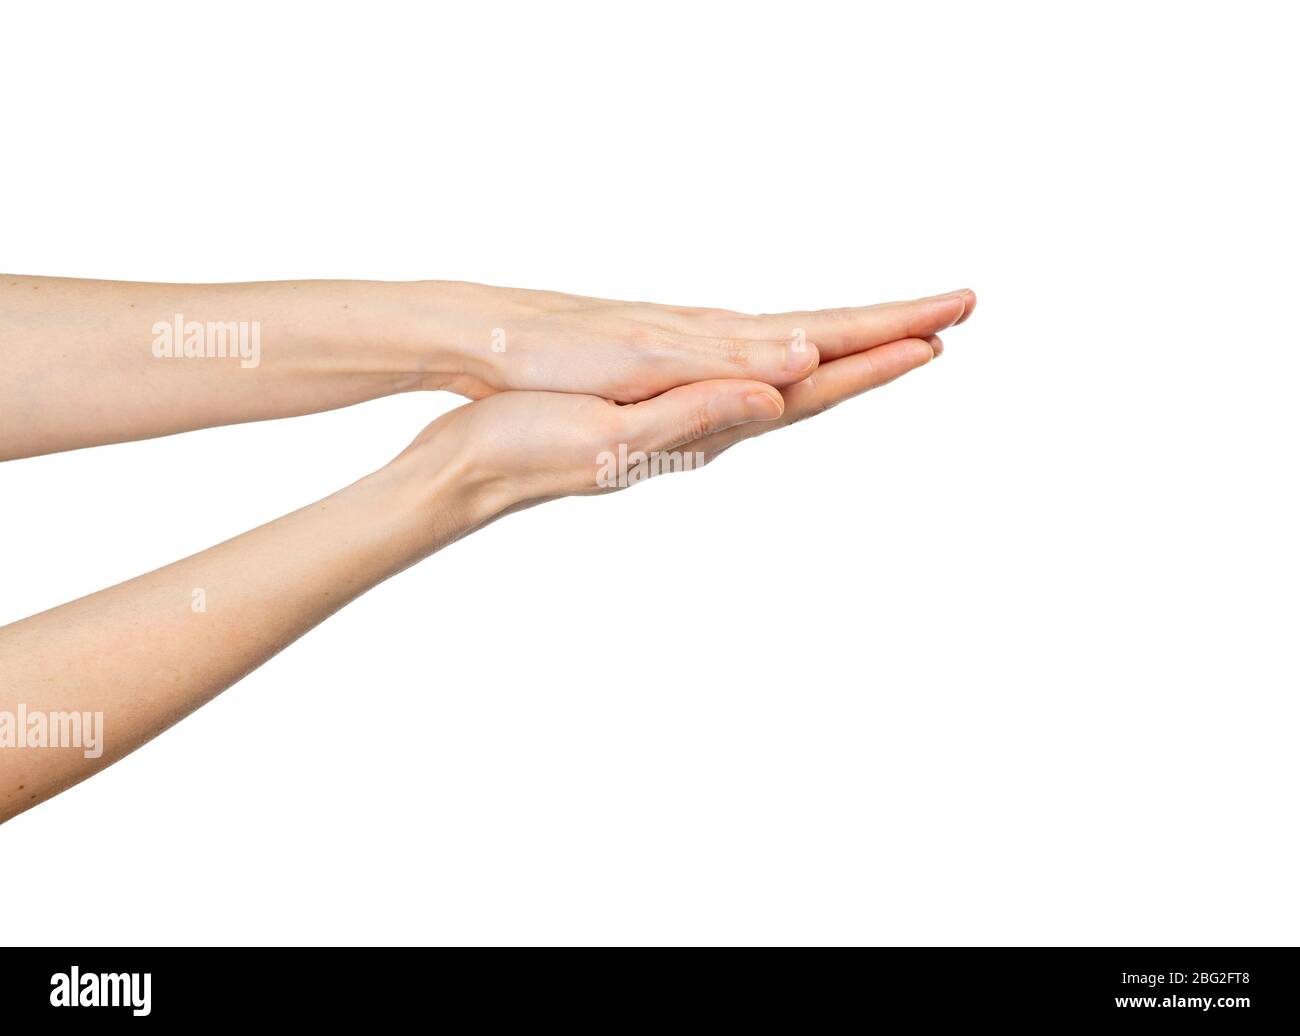 Caucasian woman washing her hands isolated on white background. Demonstration of hand washing. Concept of hygiene and prevention coronavirus. Stock Photo